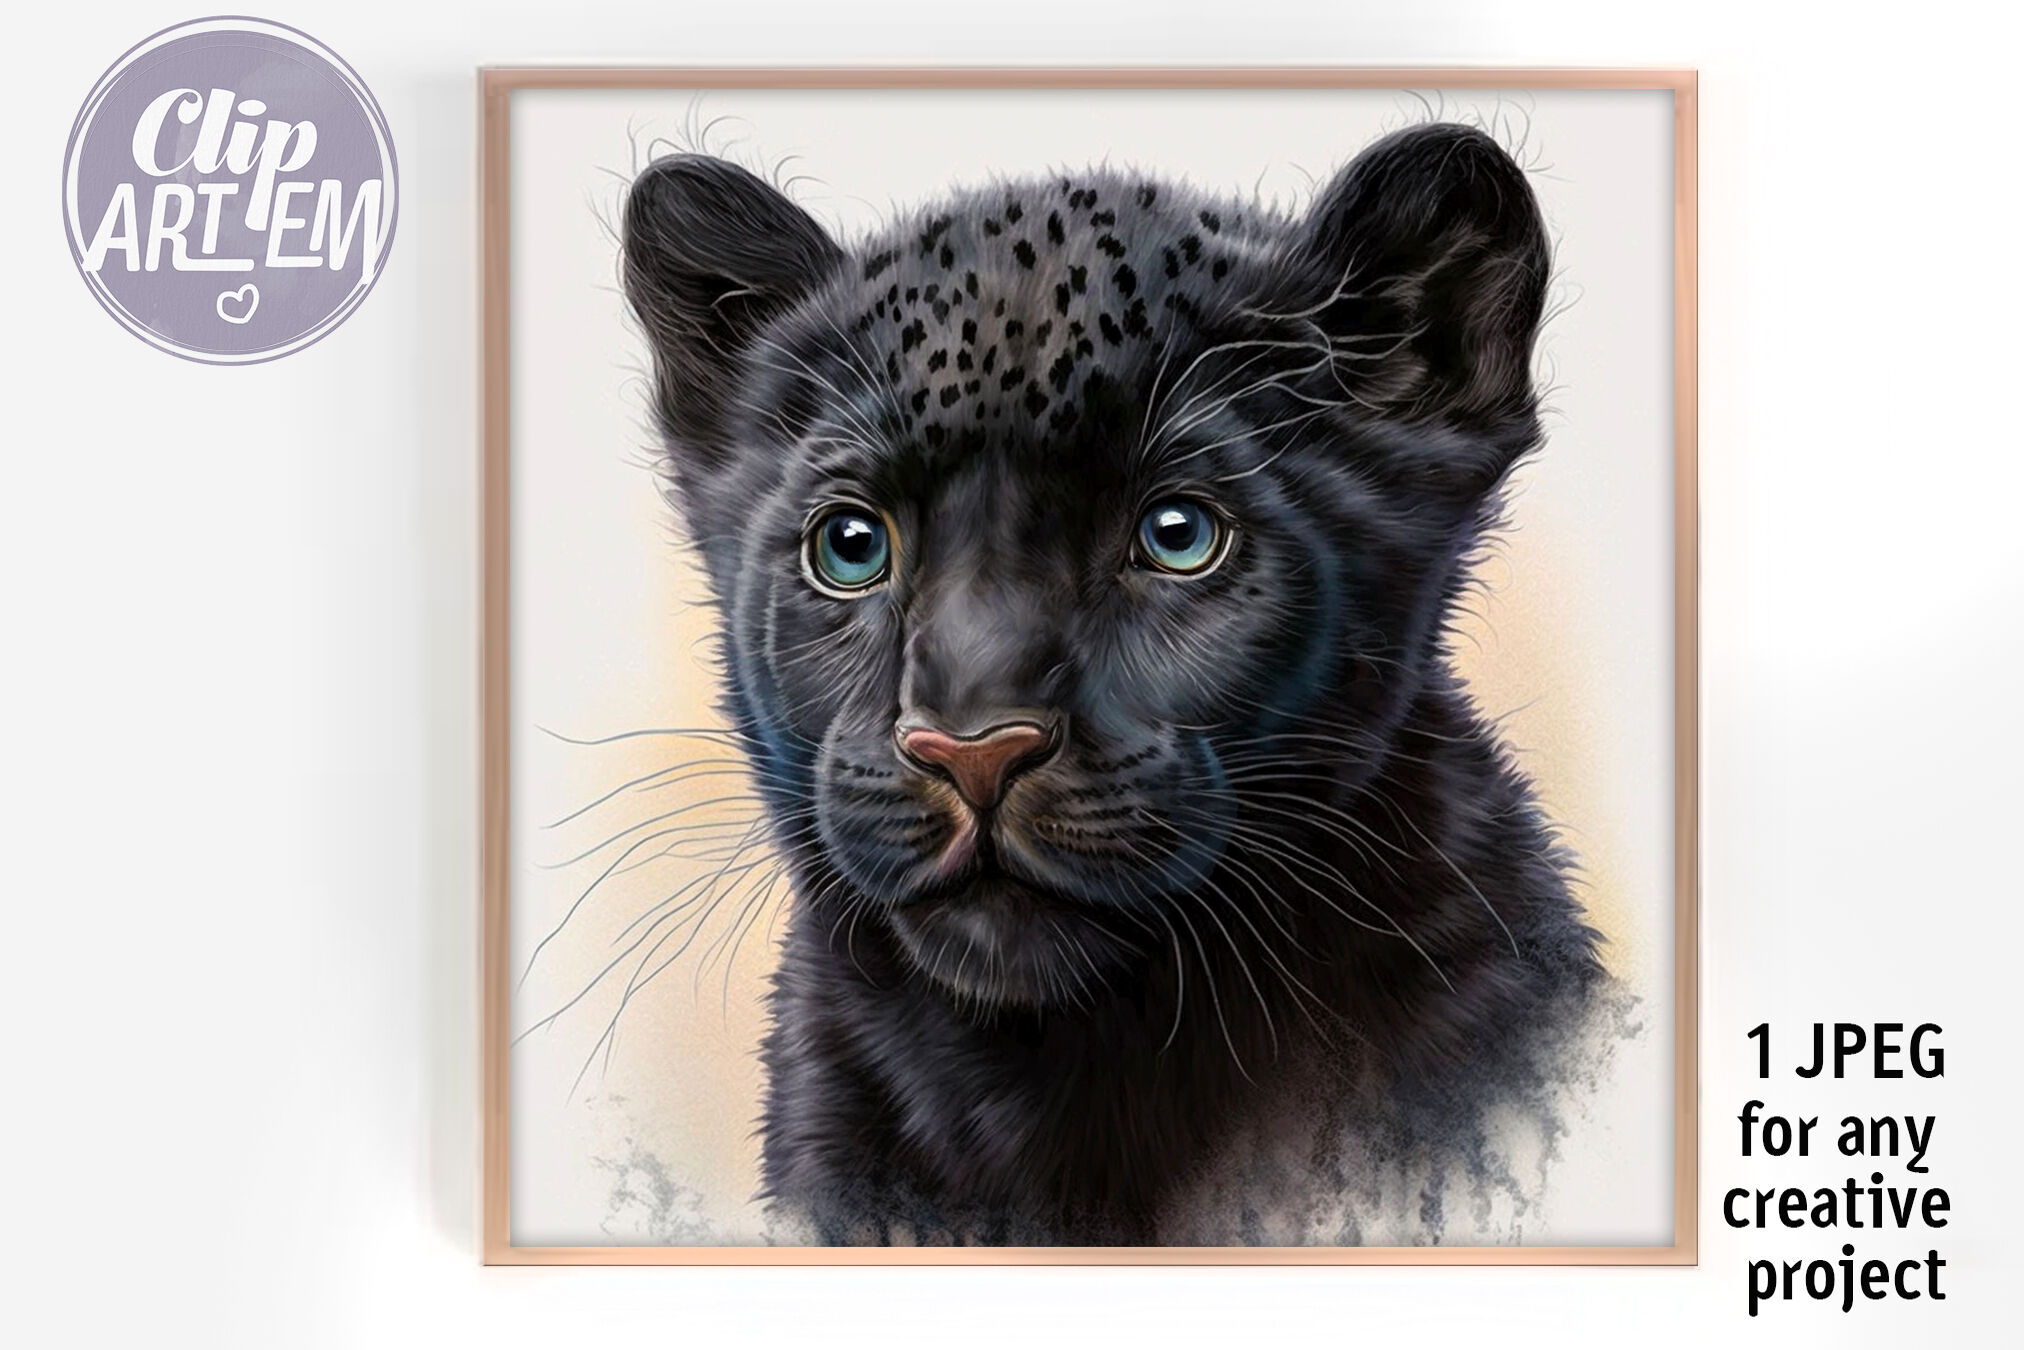 cute baby black panther with blue eyes